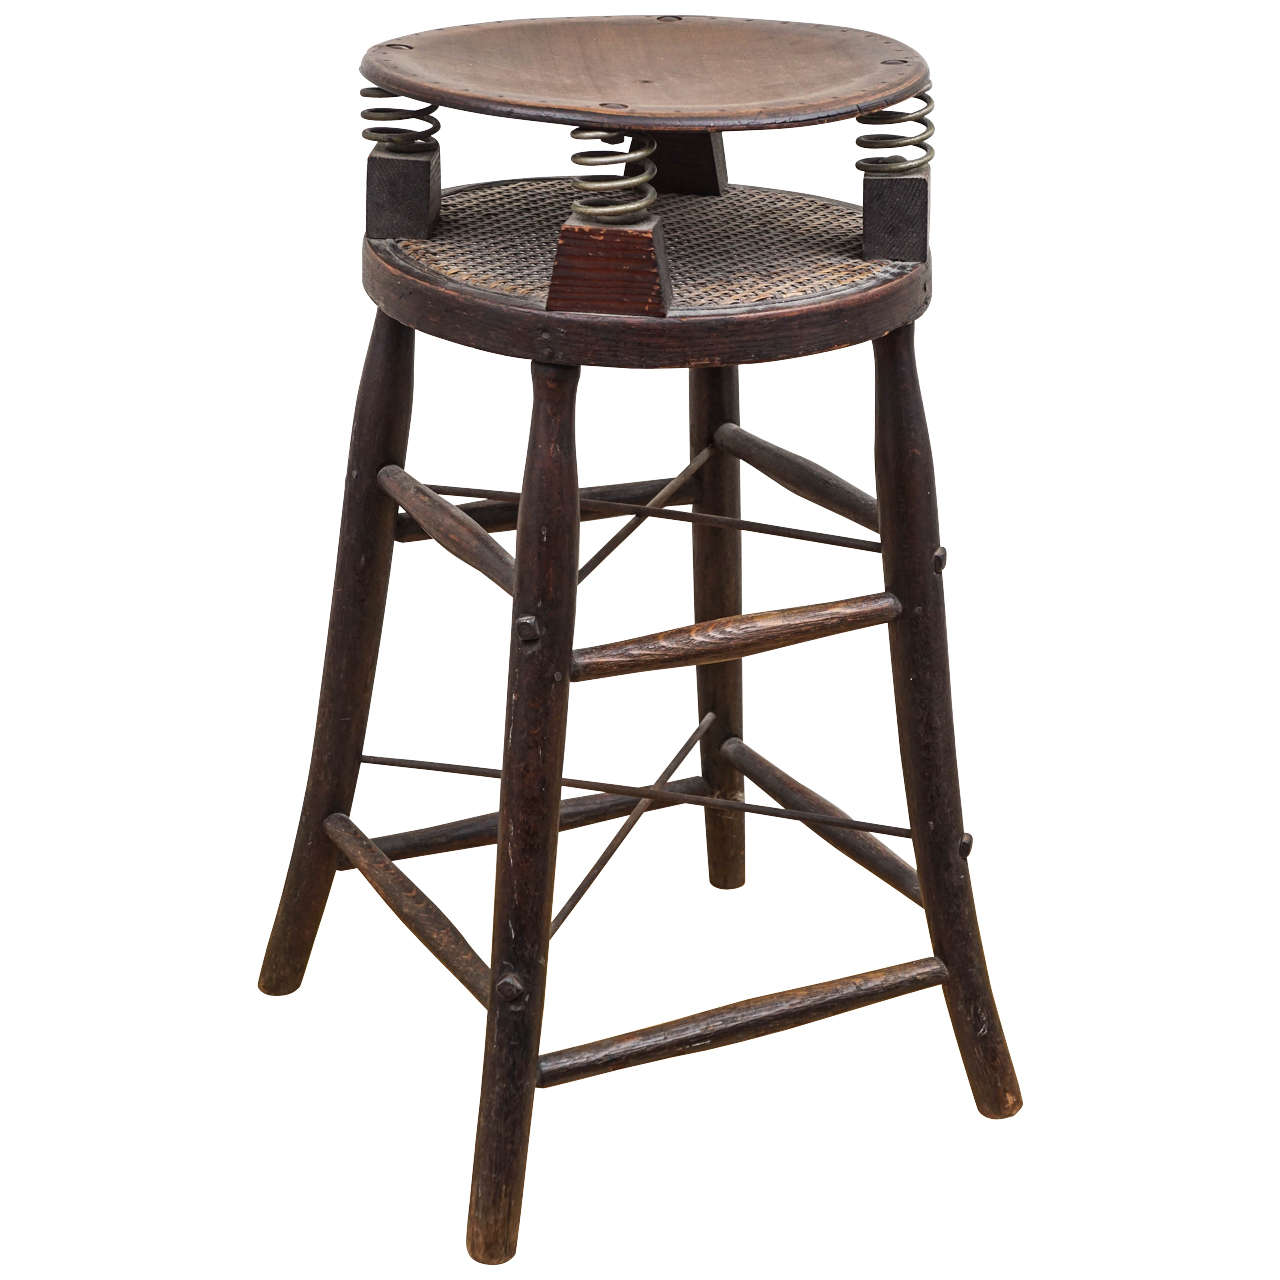 Wonderful Stool with Bicycle Springs For Sale